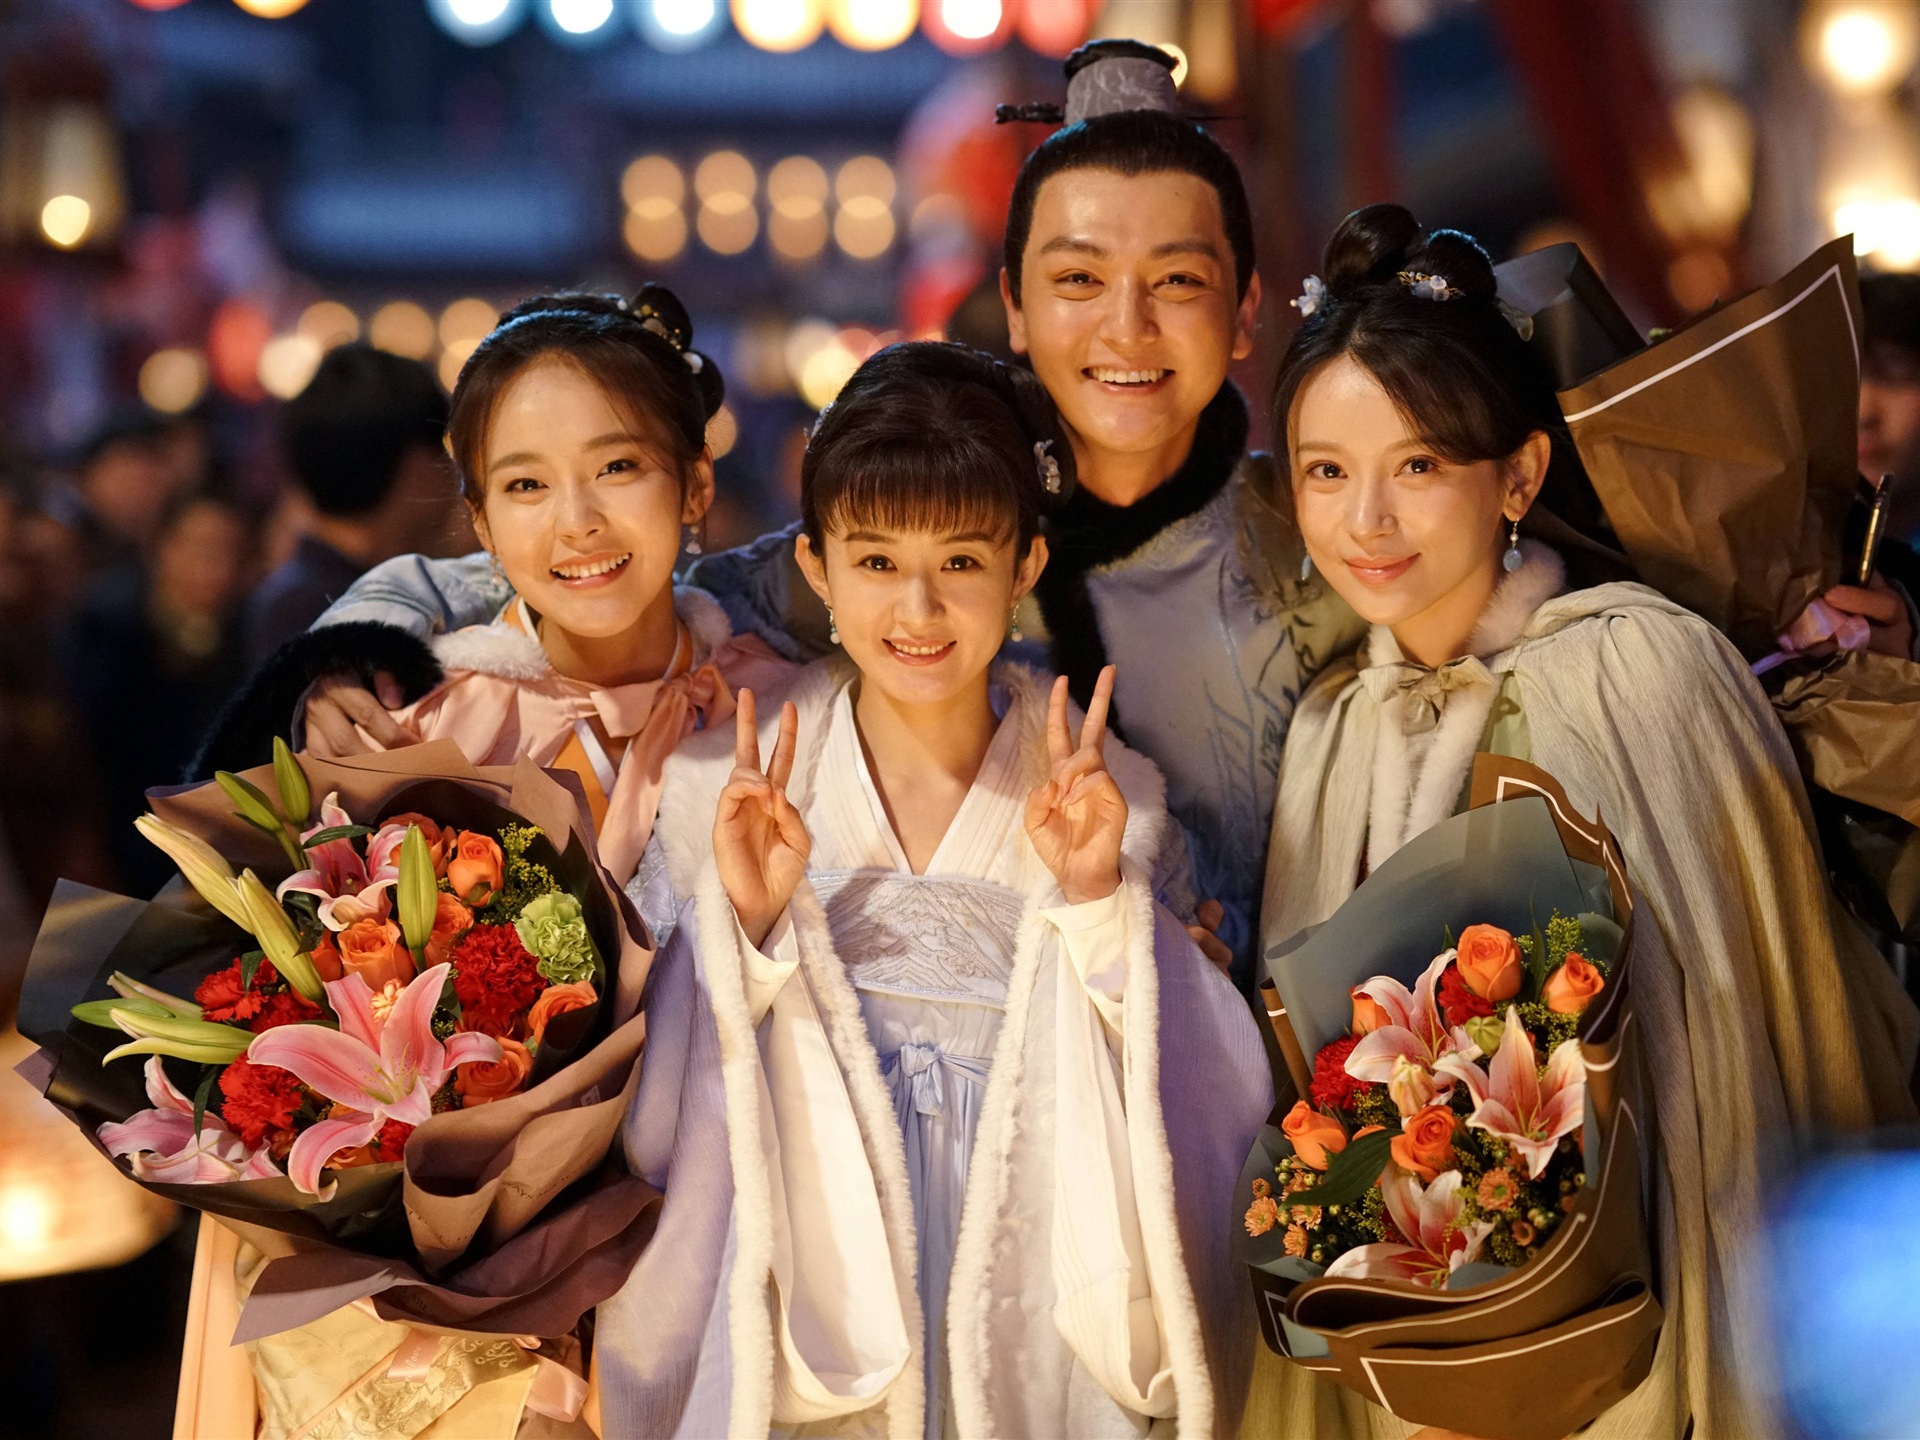 The Story Of MingLan, TV series HD wallpapers #48 - 1920x1440